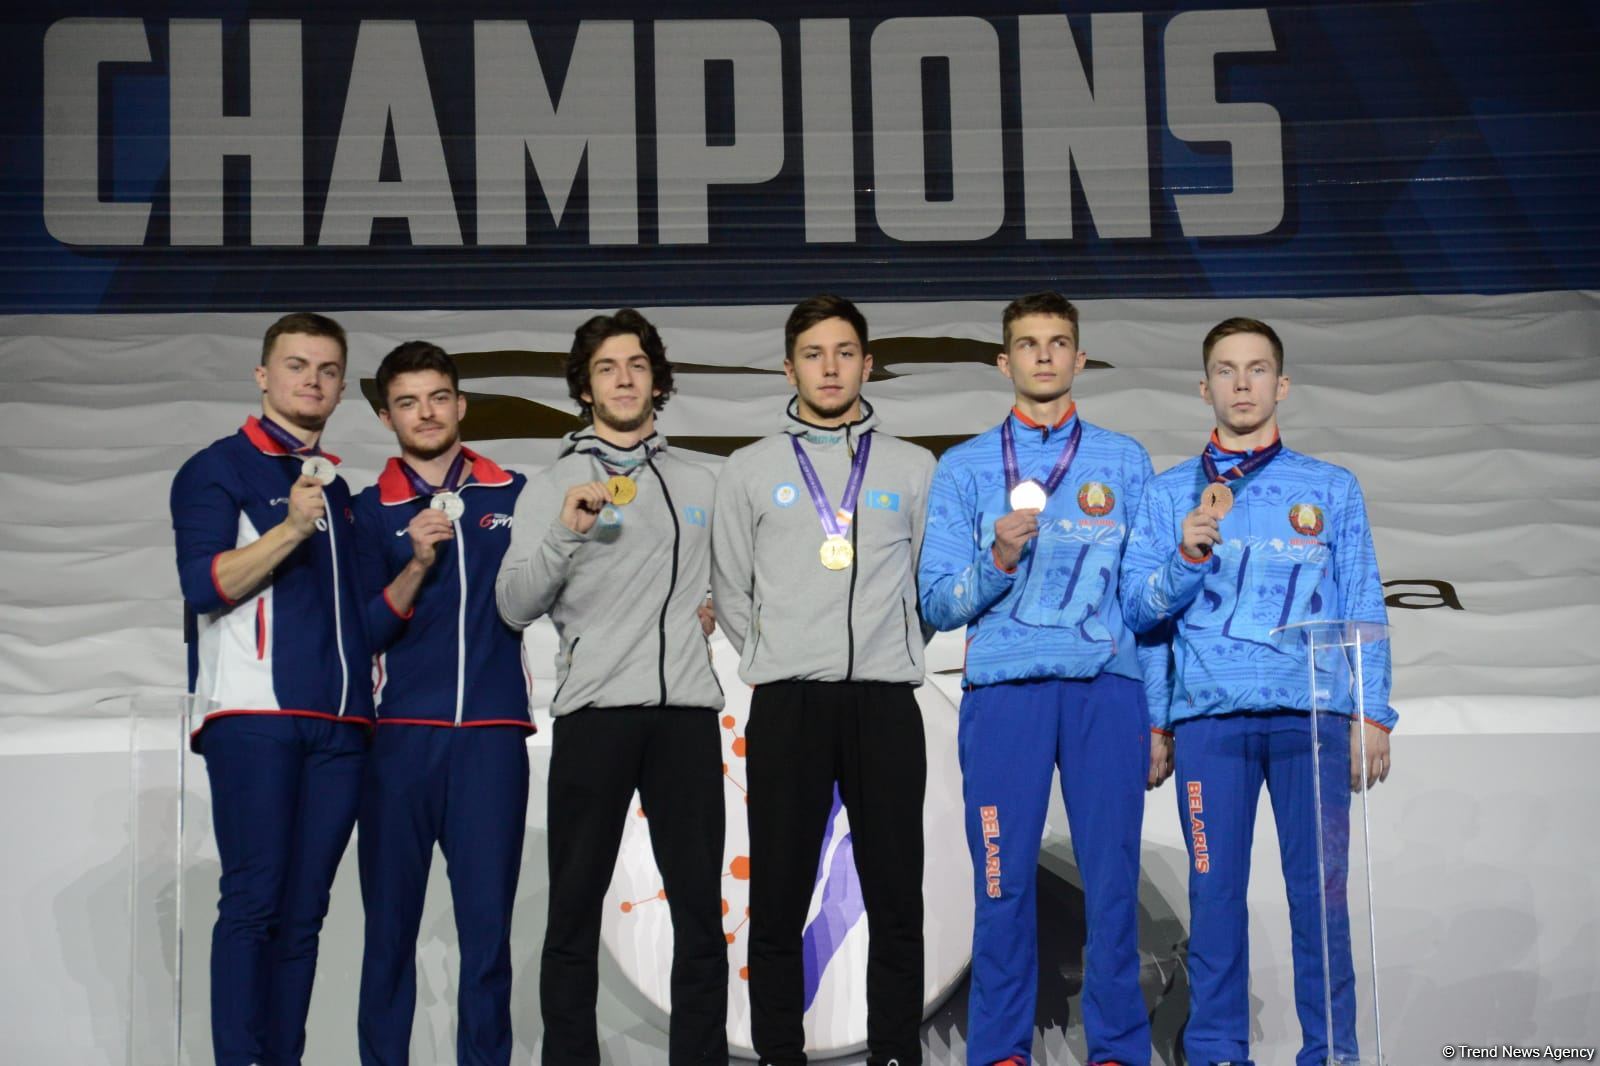 Baku holds awarding ceremony for winners of final day of FIG World Age Group Competitions - Gallery Image